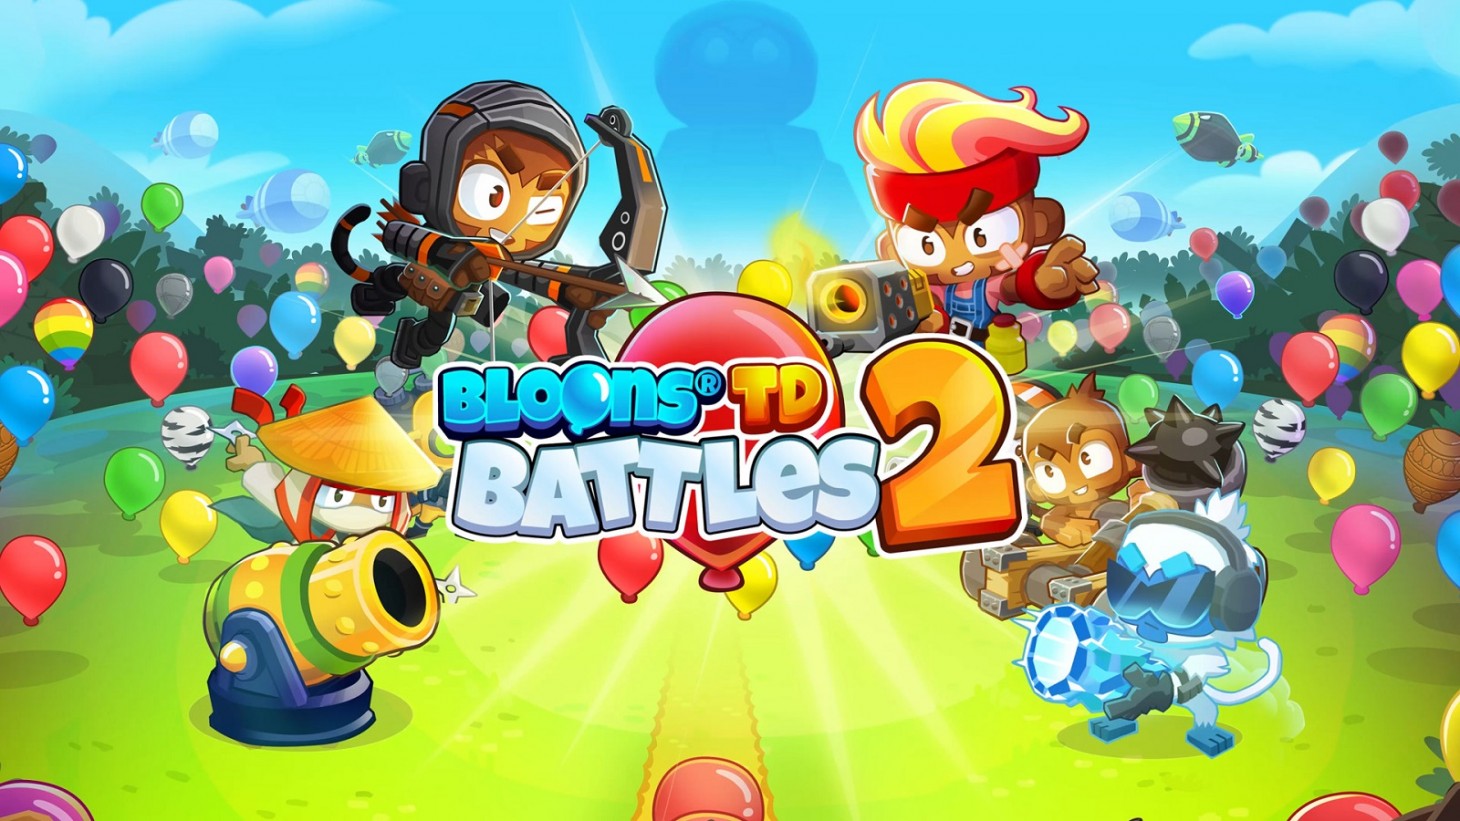 Free Download Bloons TD 6 IOS/APK Version Full Game Latest Version For Iphone 3